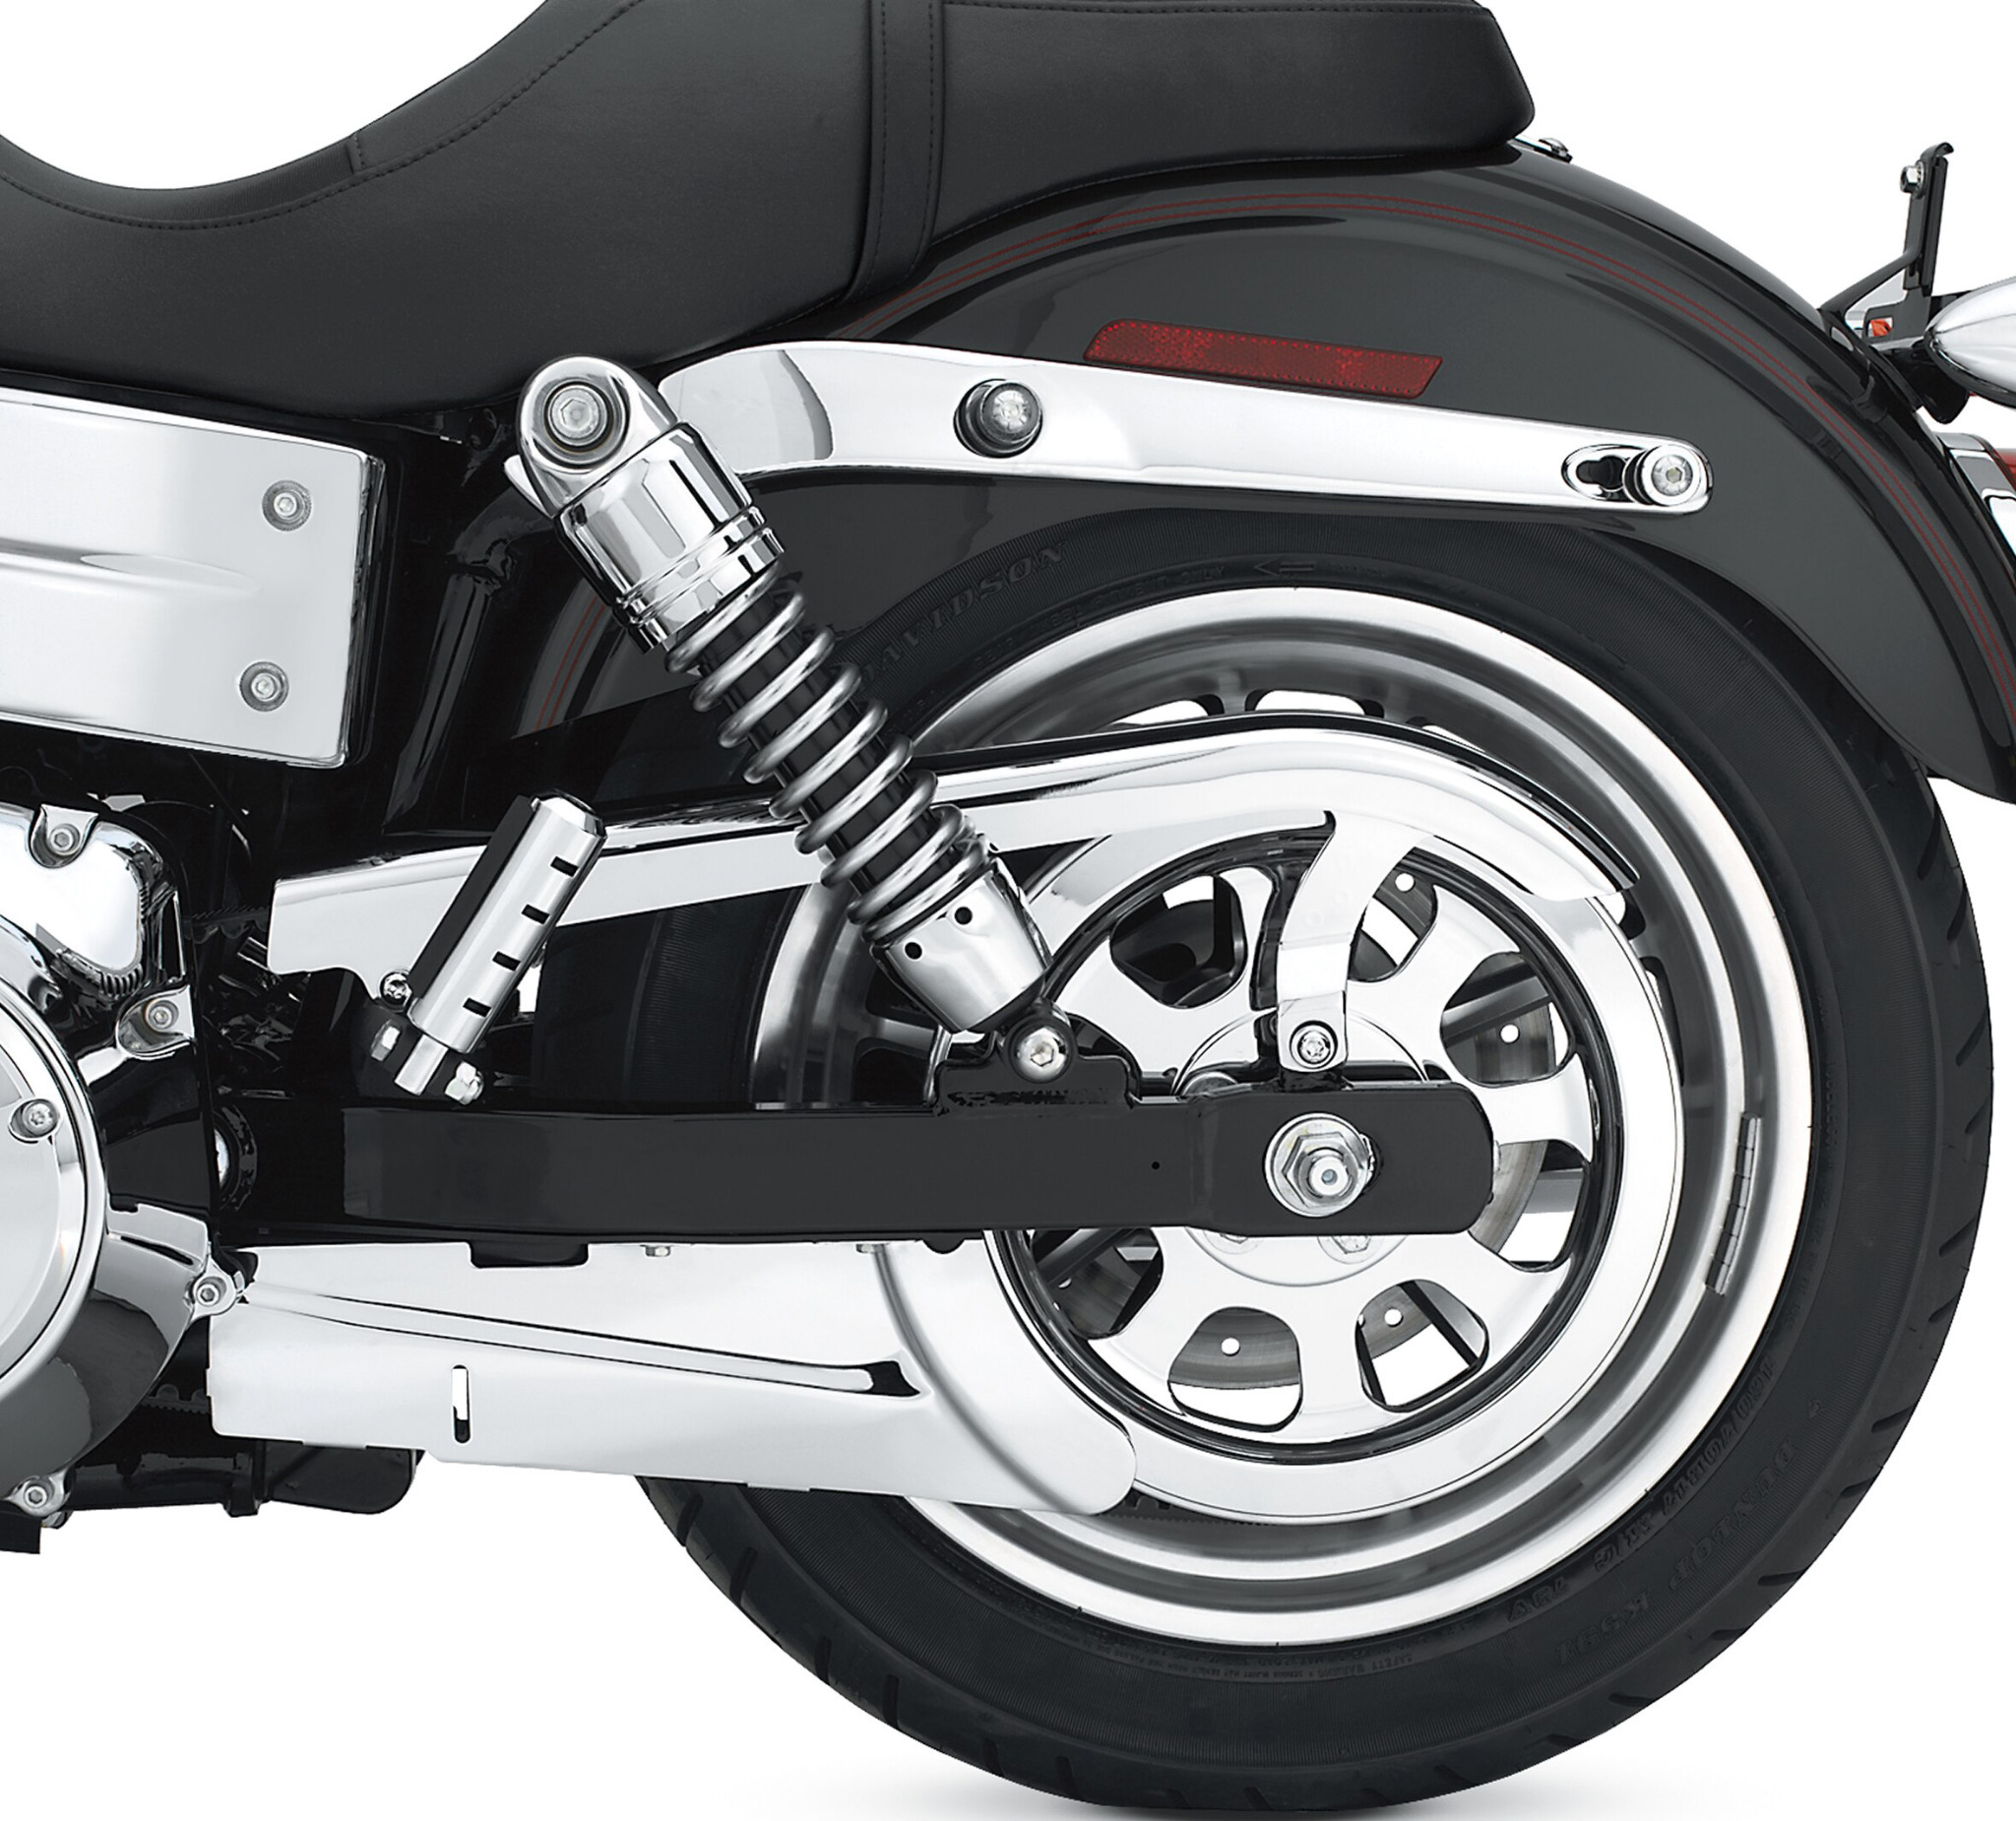 harley davidson drive belt replacement cost